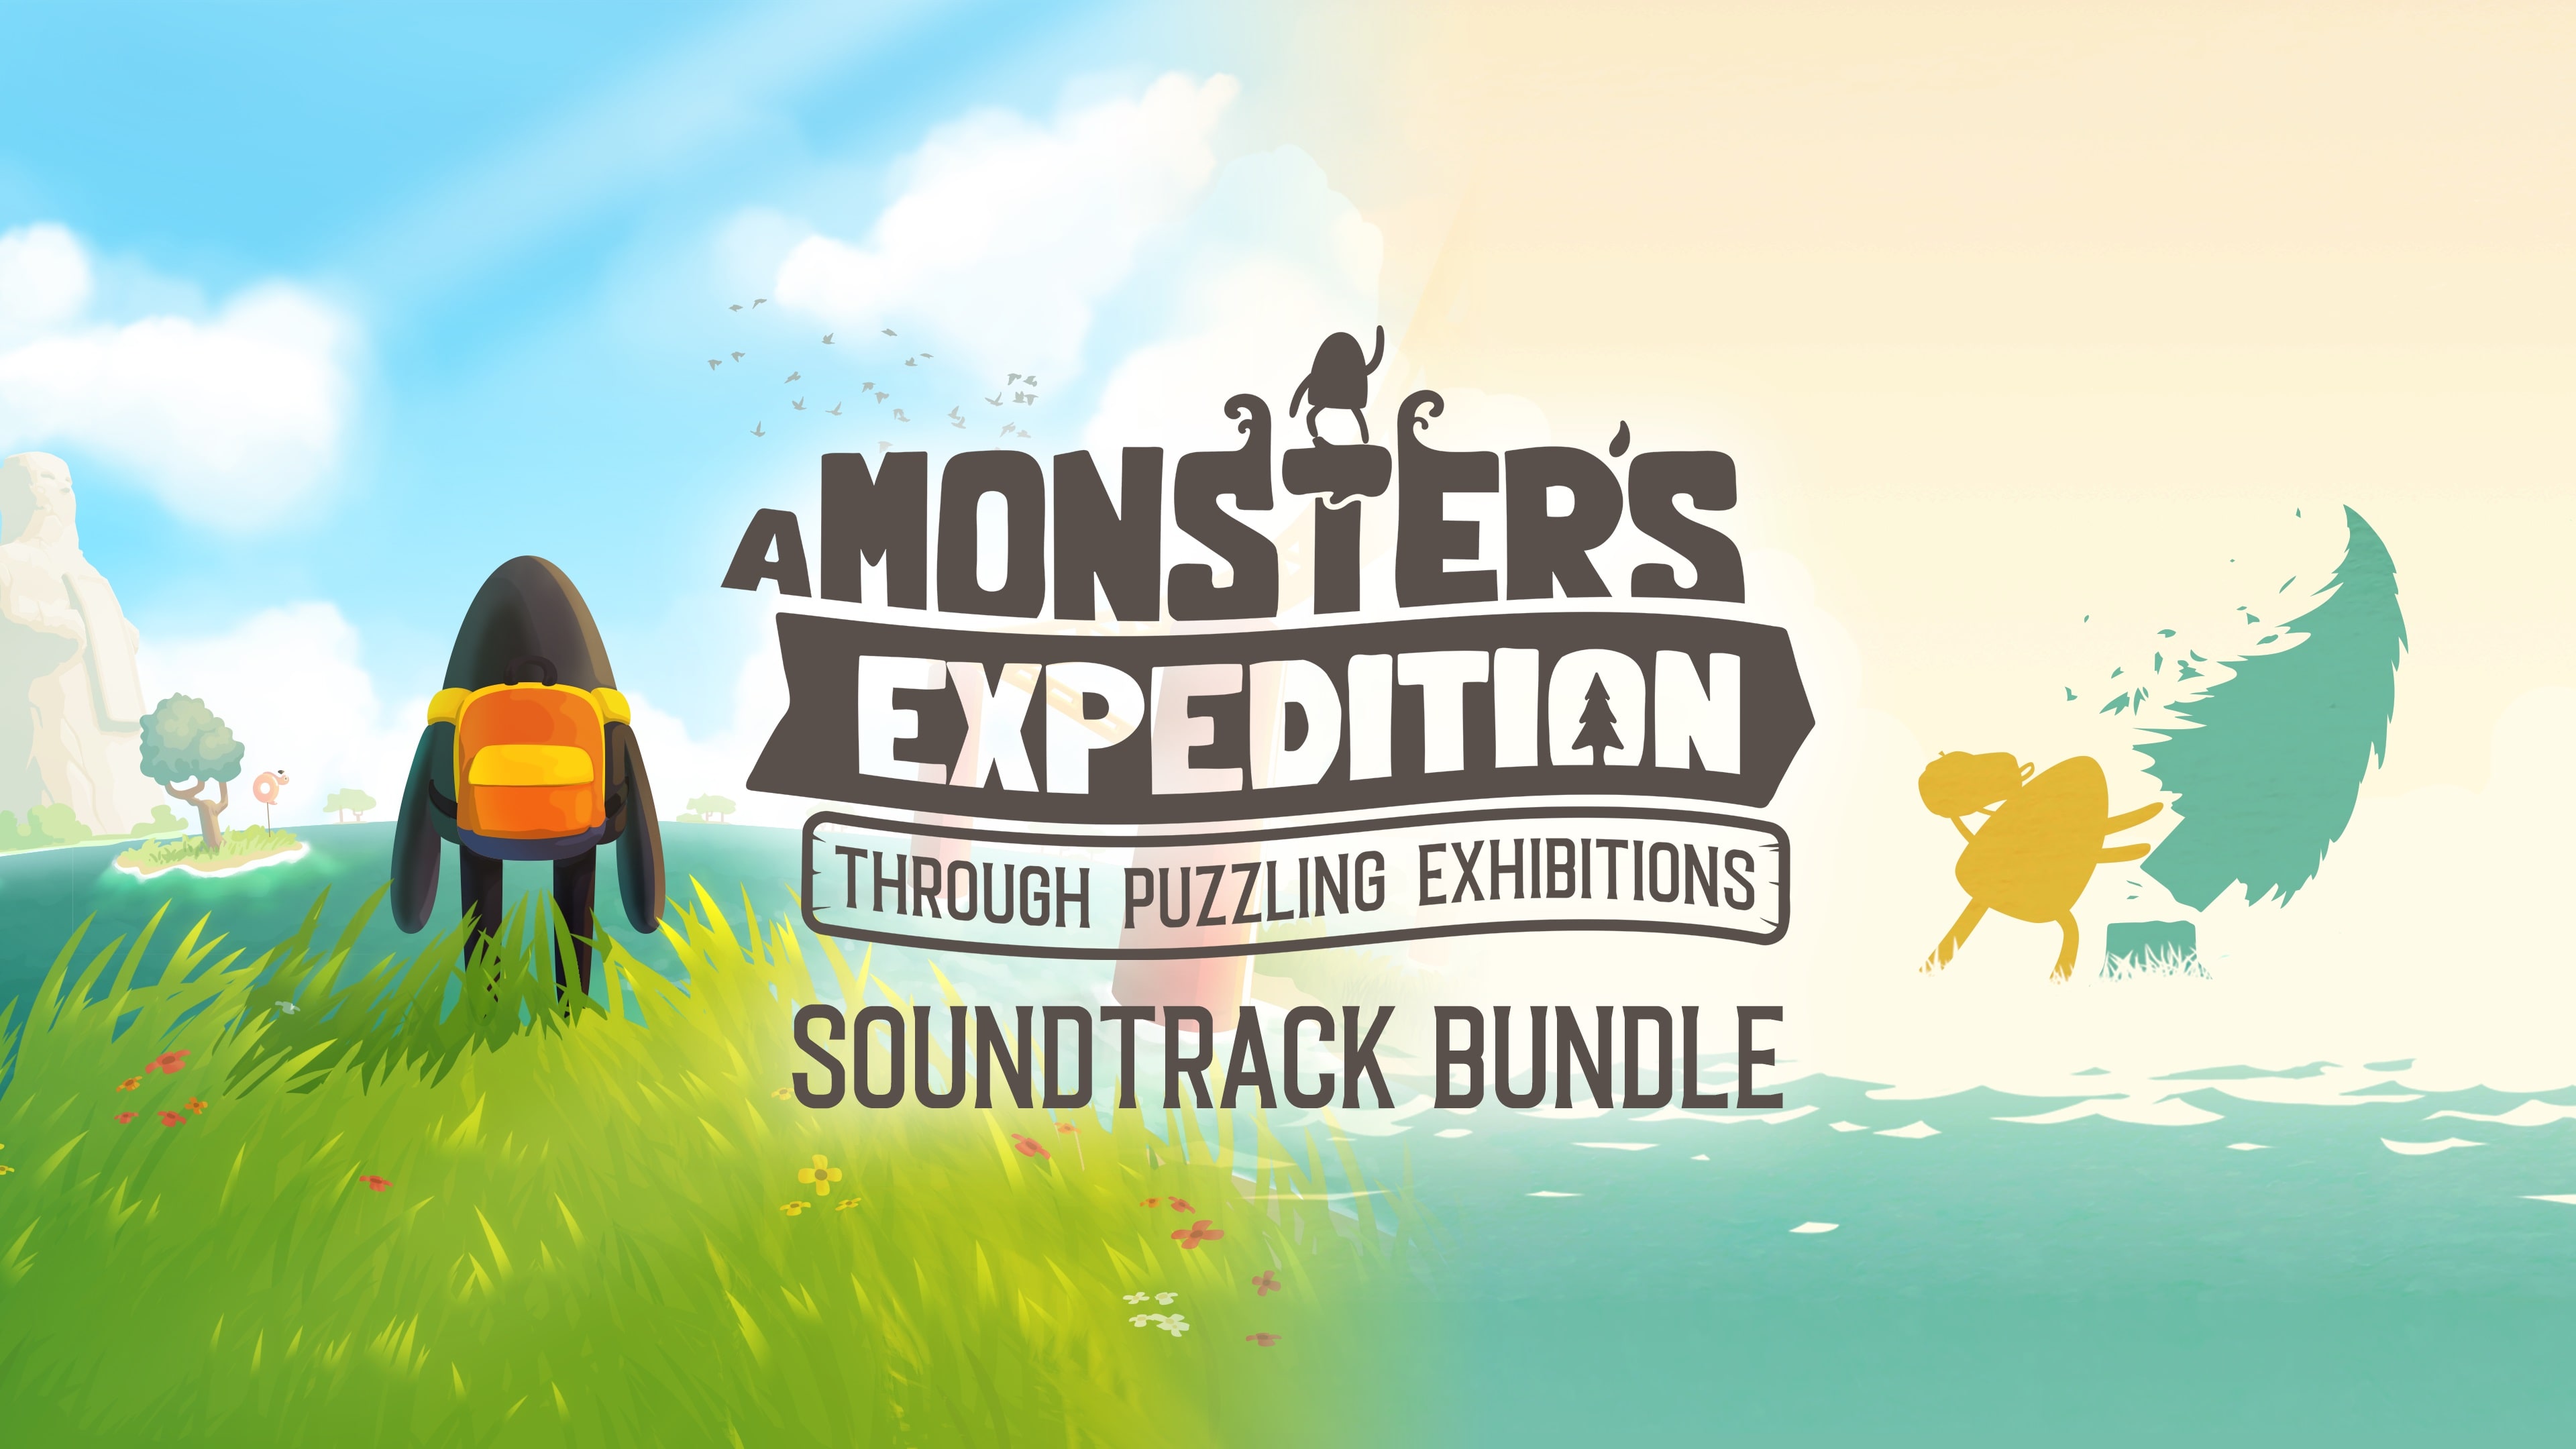 Game and Soundtrack Bundle